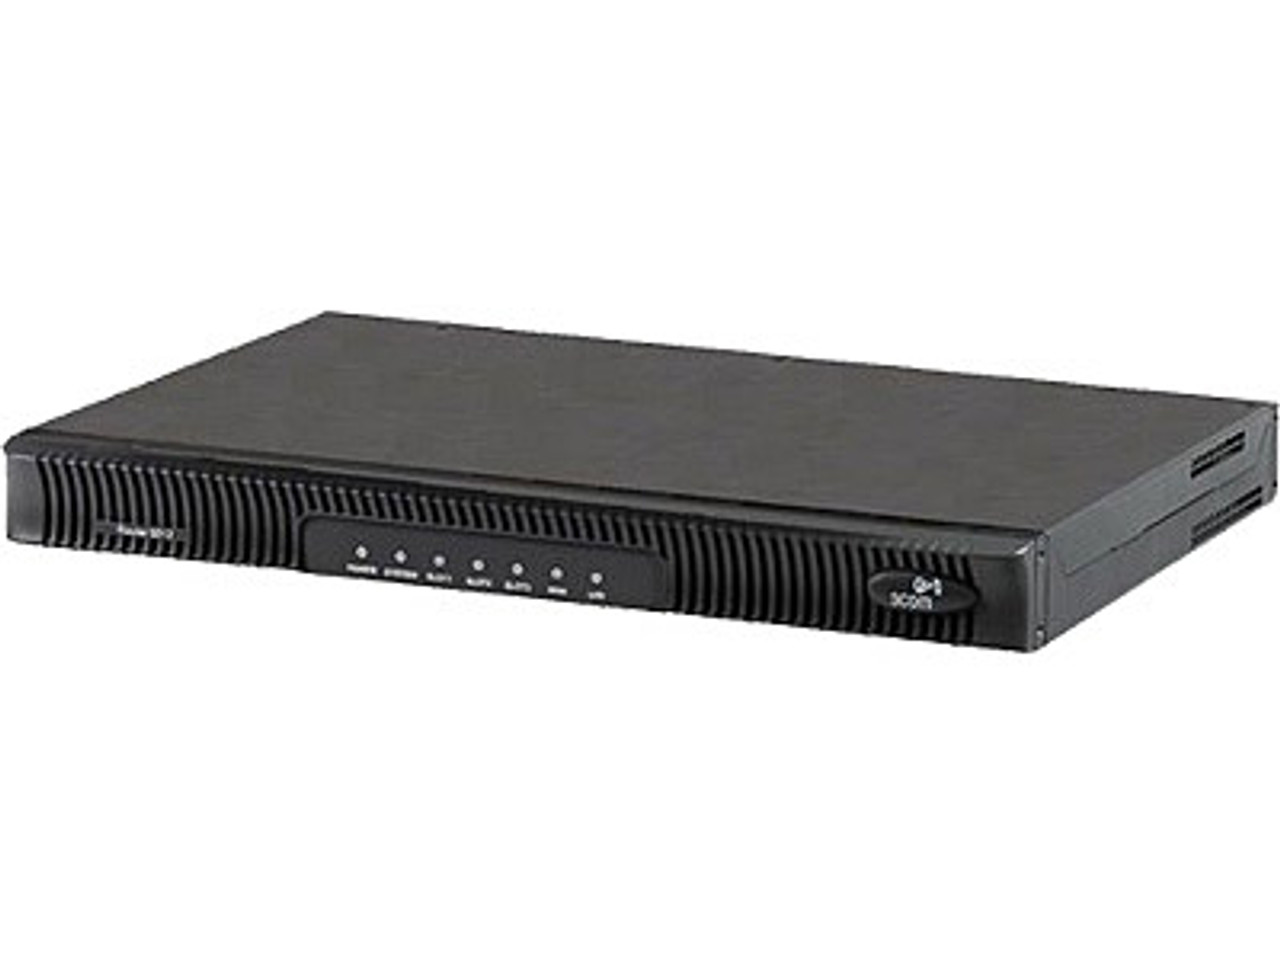 Router 5642